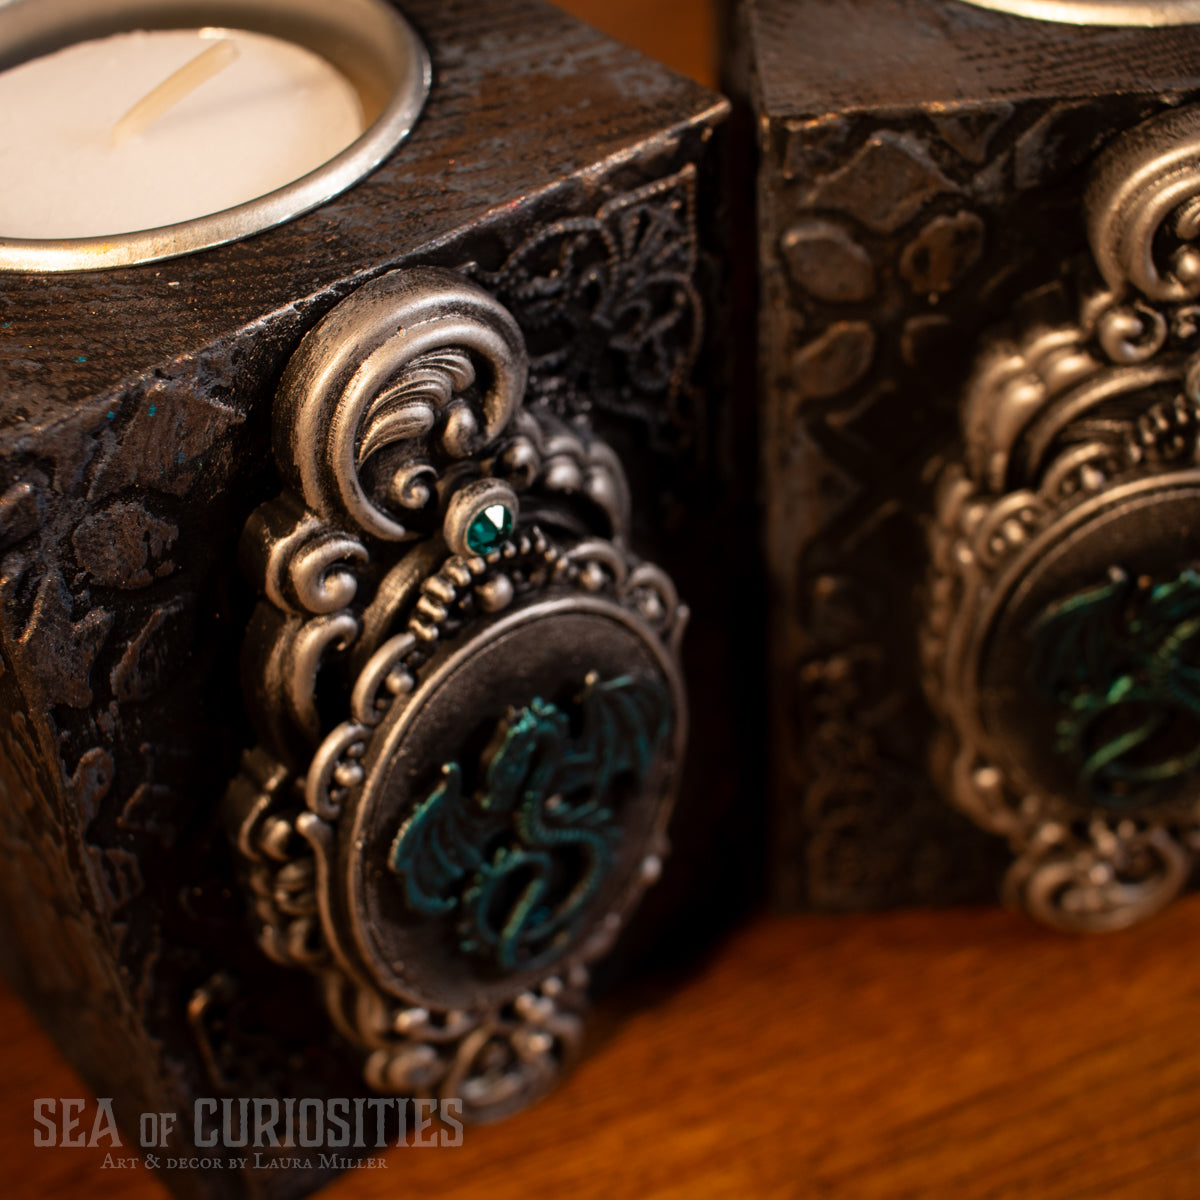 Dragon - Tall Gothic/Witchy Tealight Holders (sold individually)